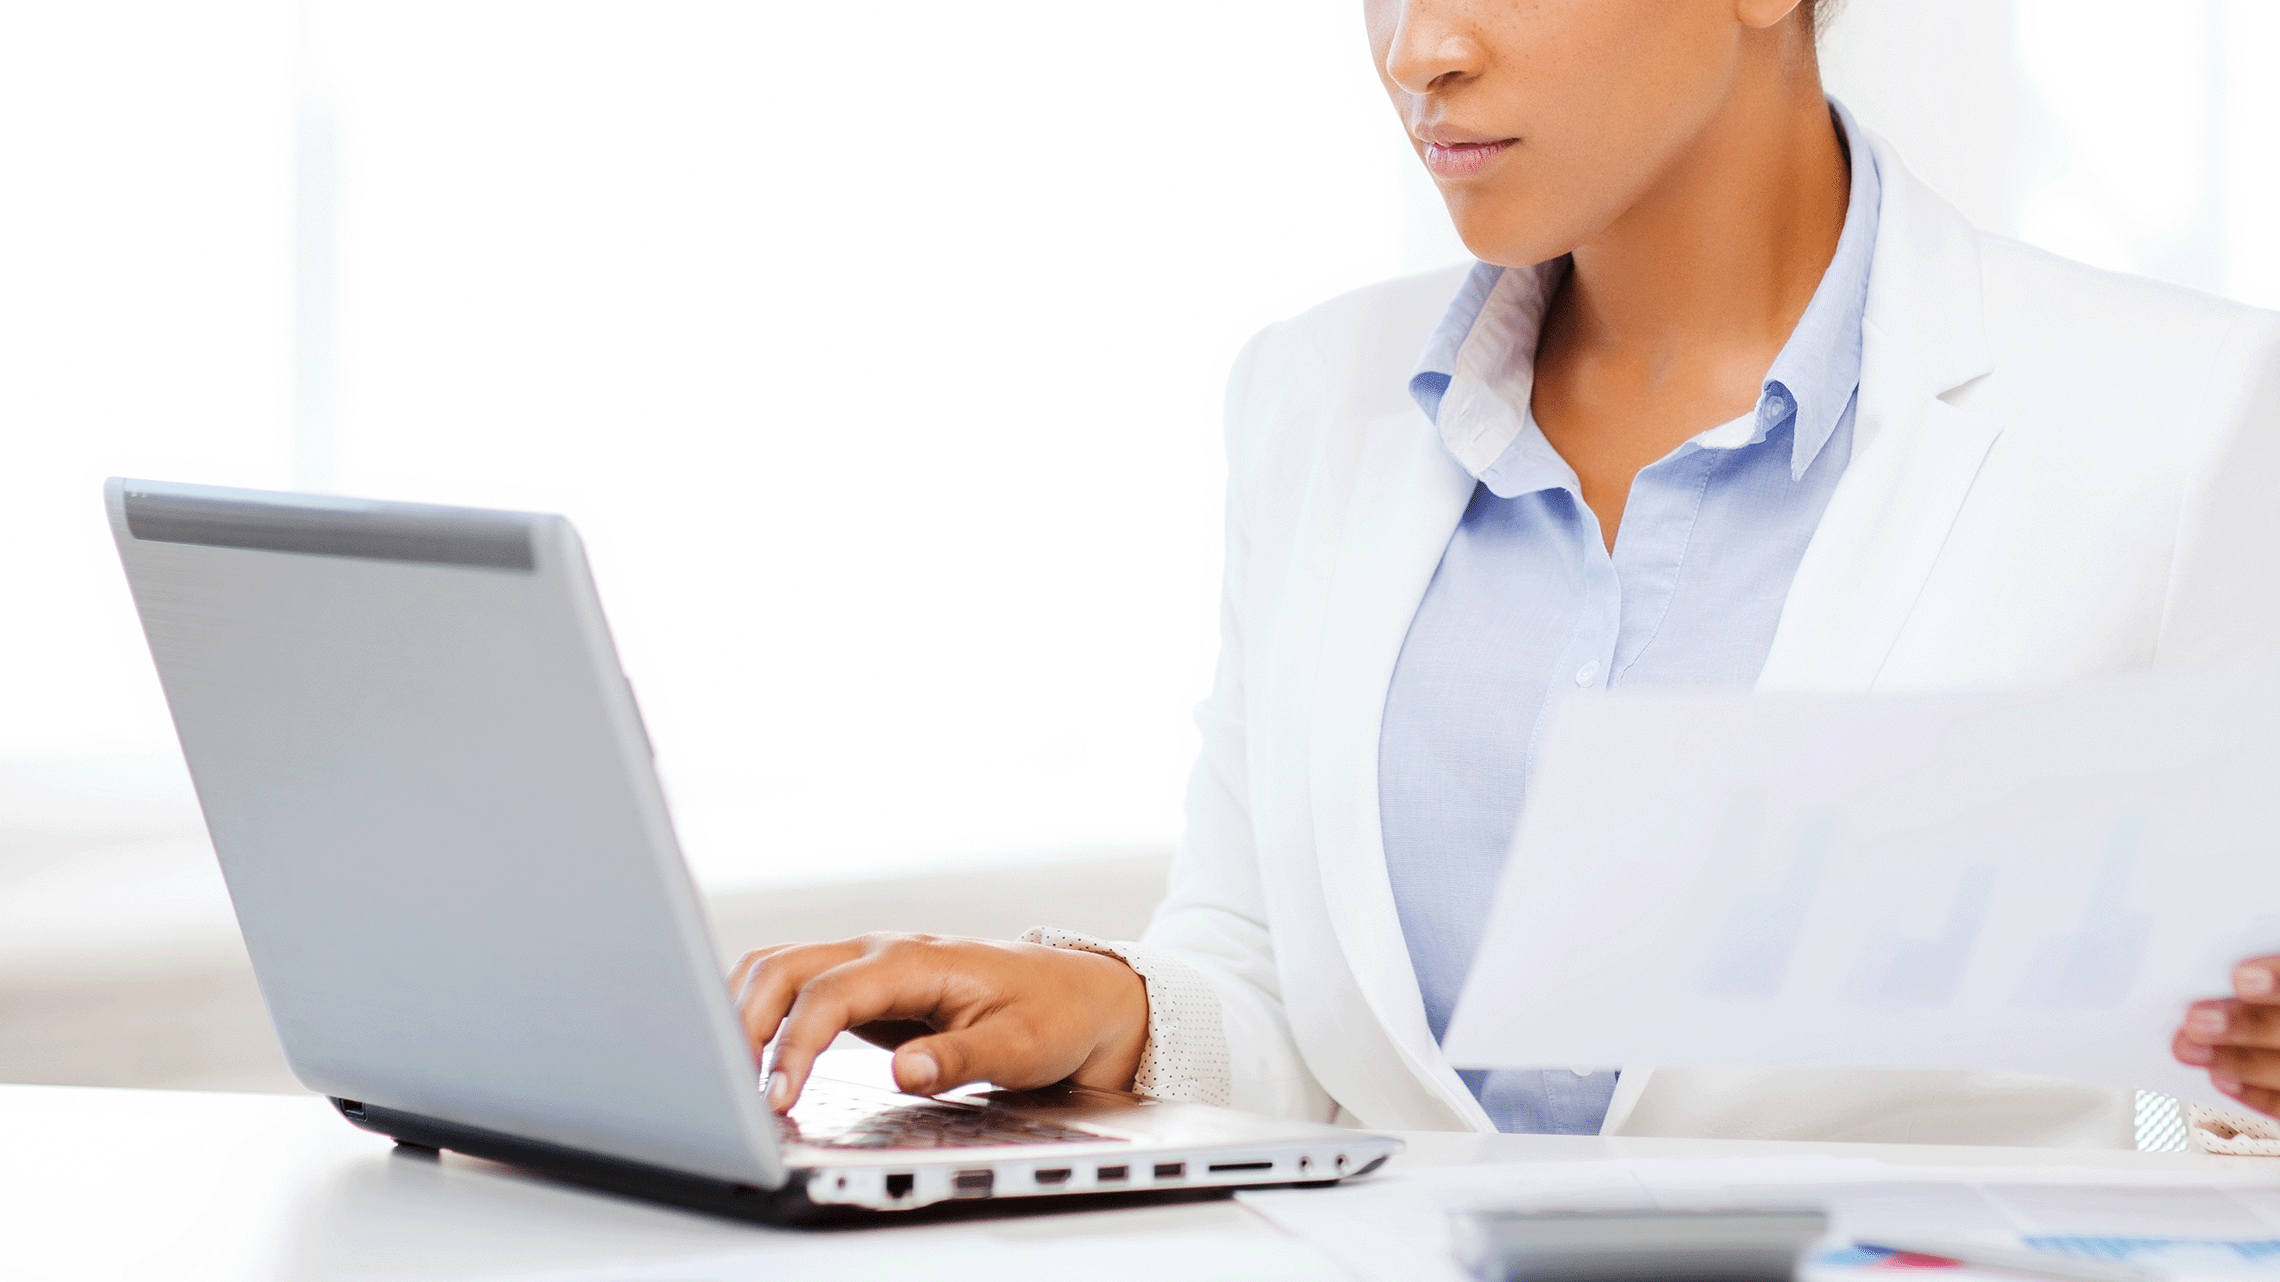 Woman entering information in online form.